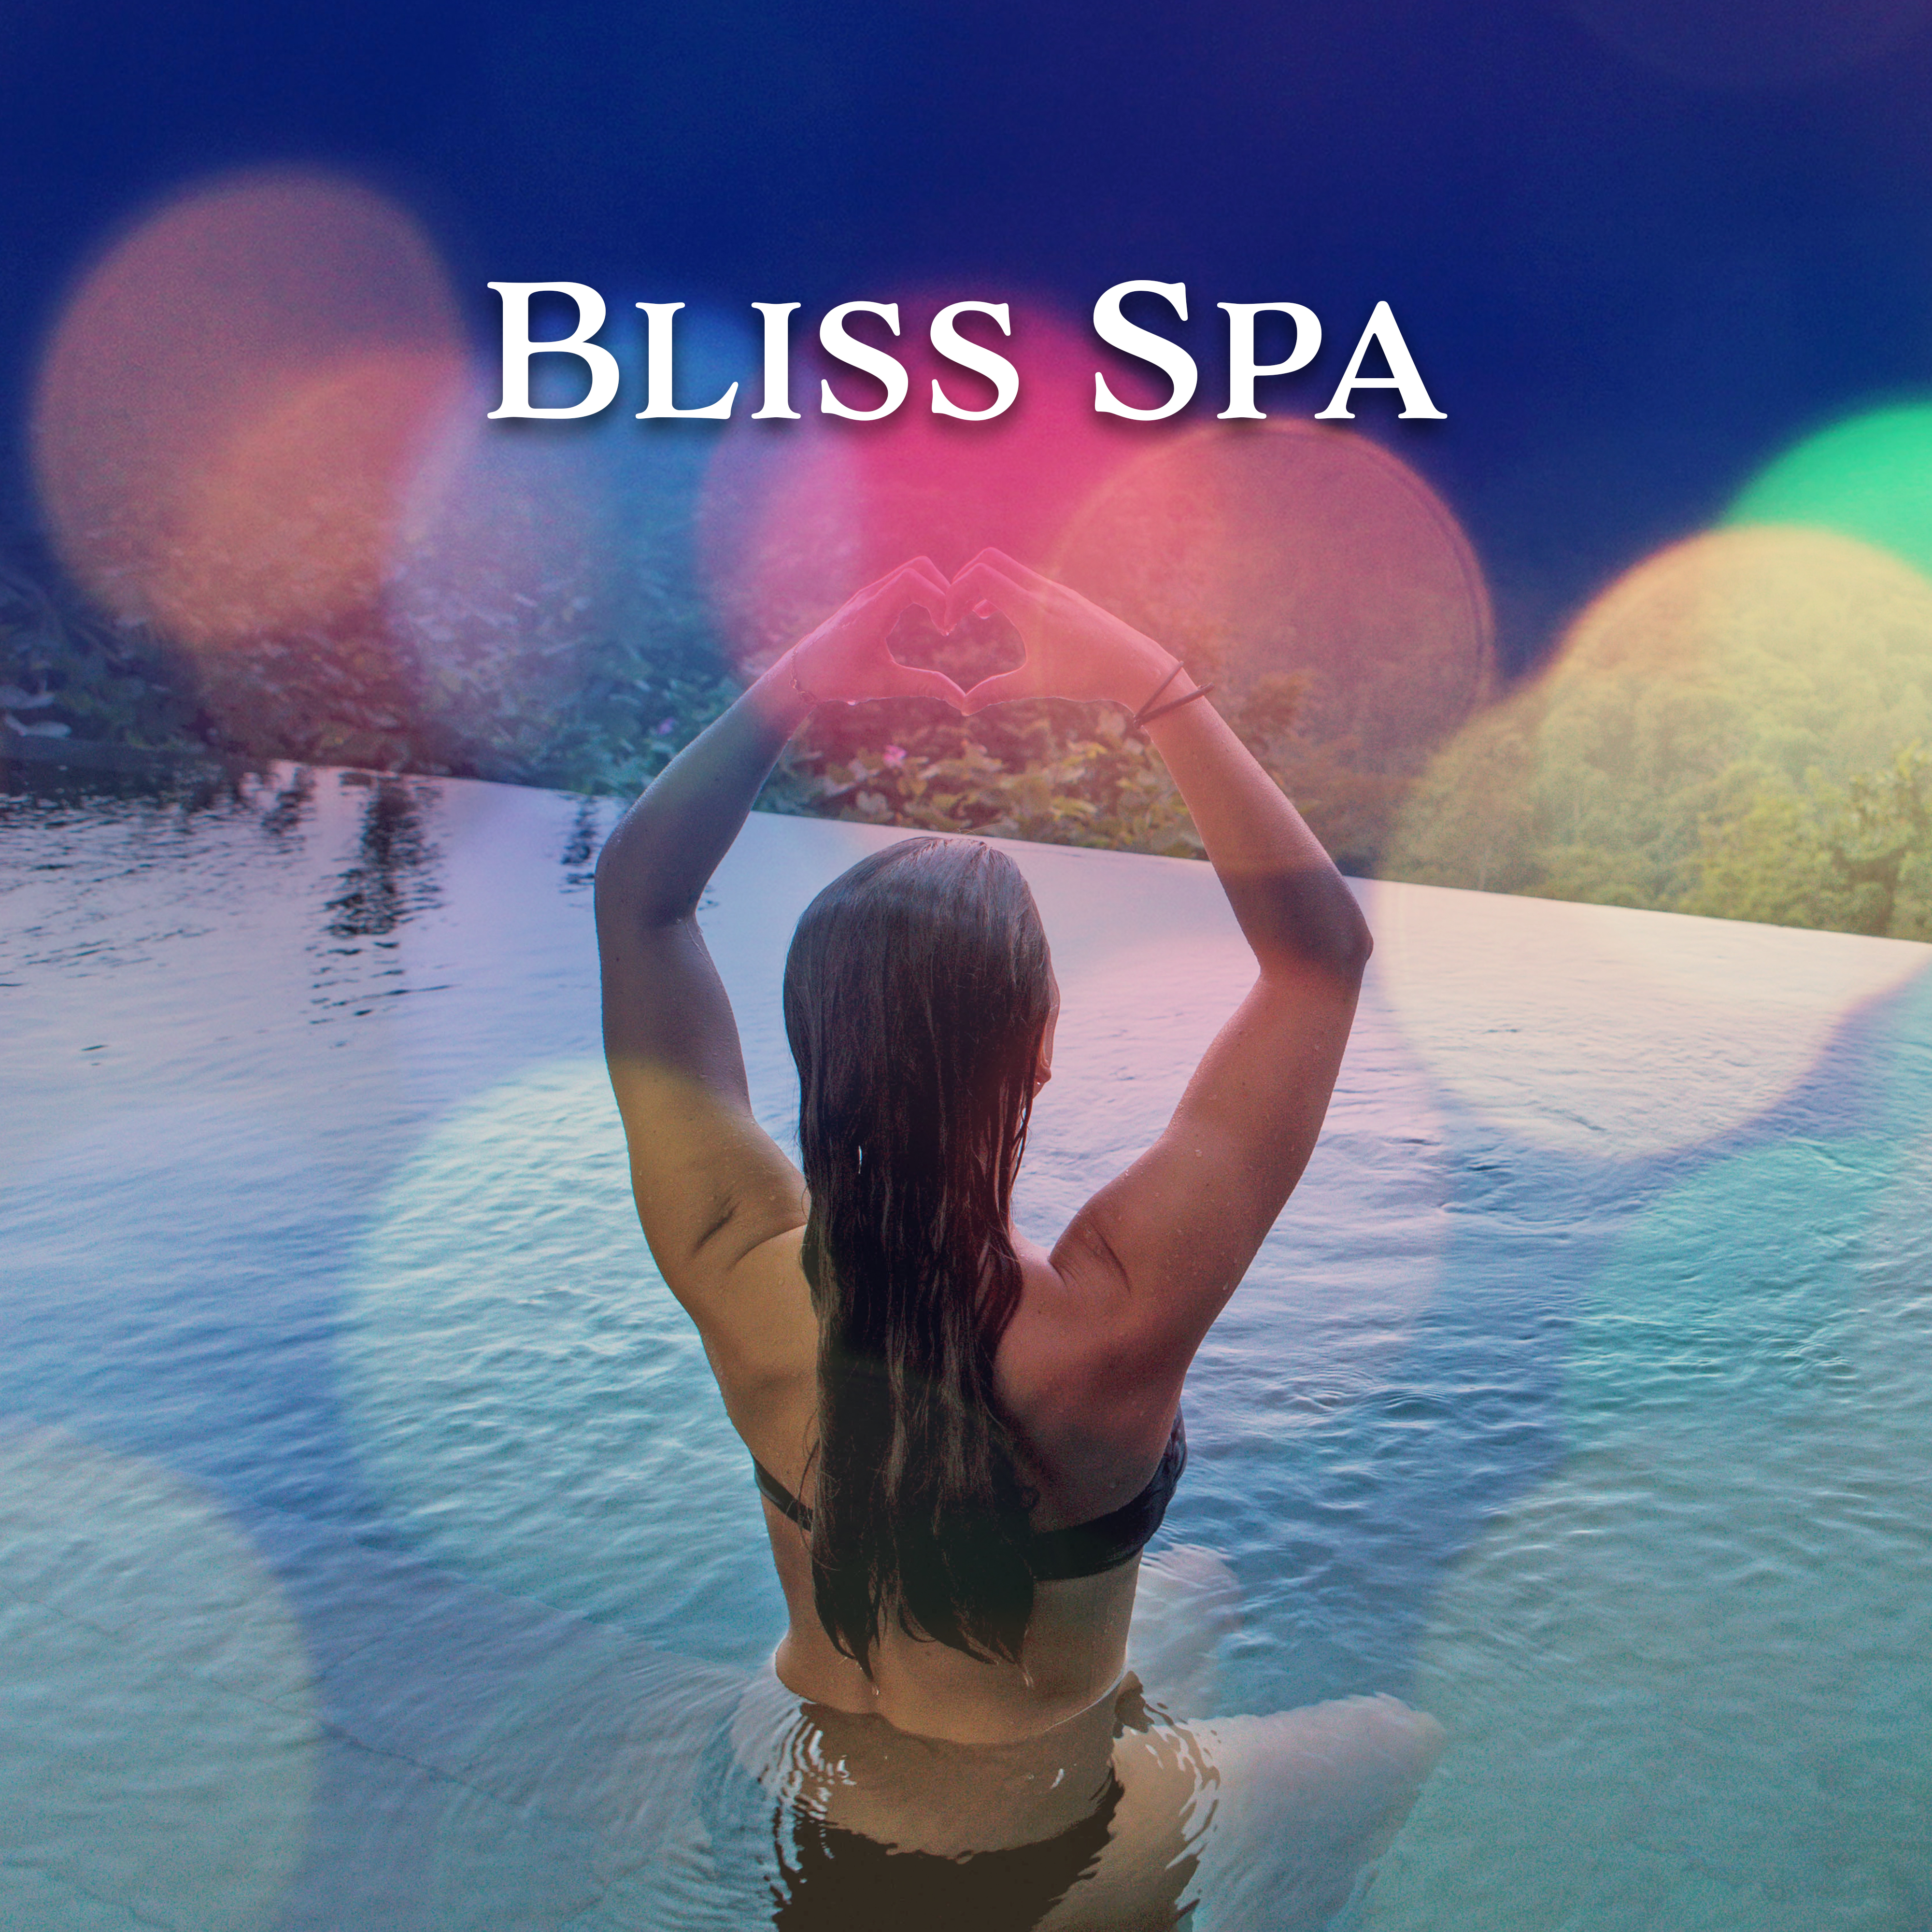 Bliss Spa  Healing Nature Sounds,  Background Music for Massage, Spa, Wellness, Beaty Treatments